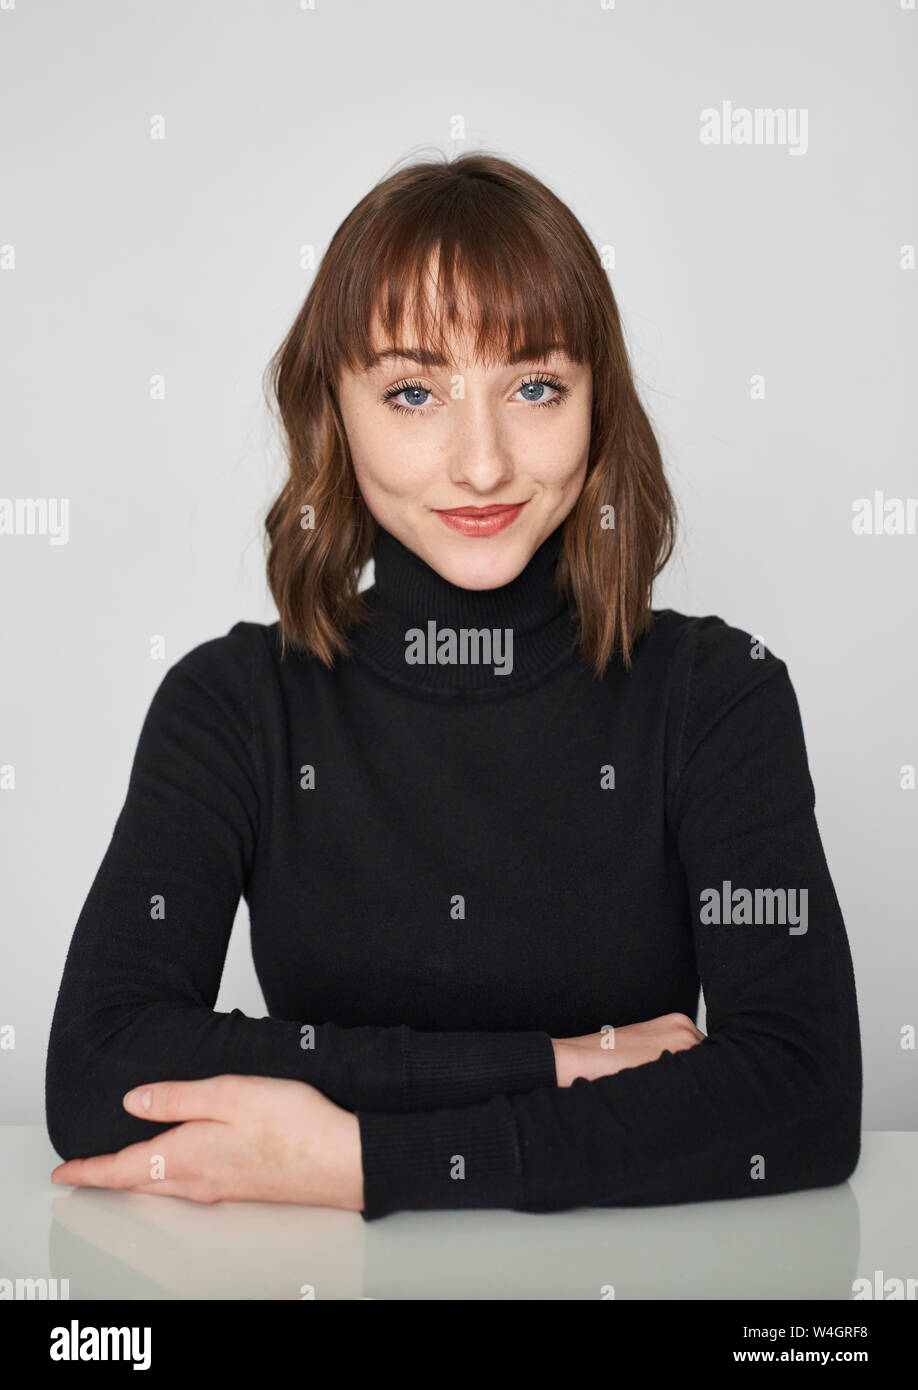 Portrait of smiling young woman wearing black turtleneck pullover Stock Photo